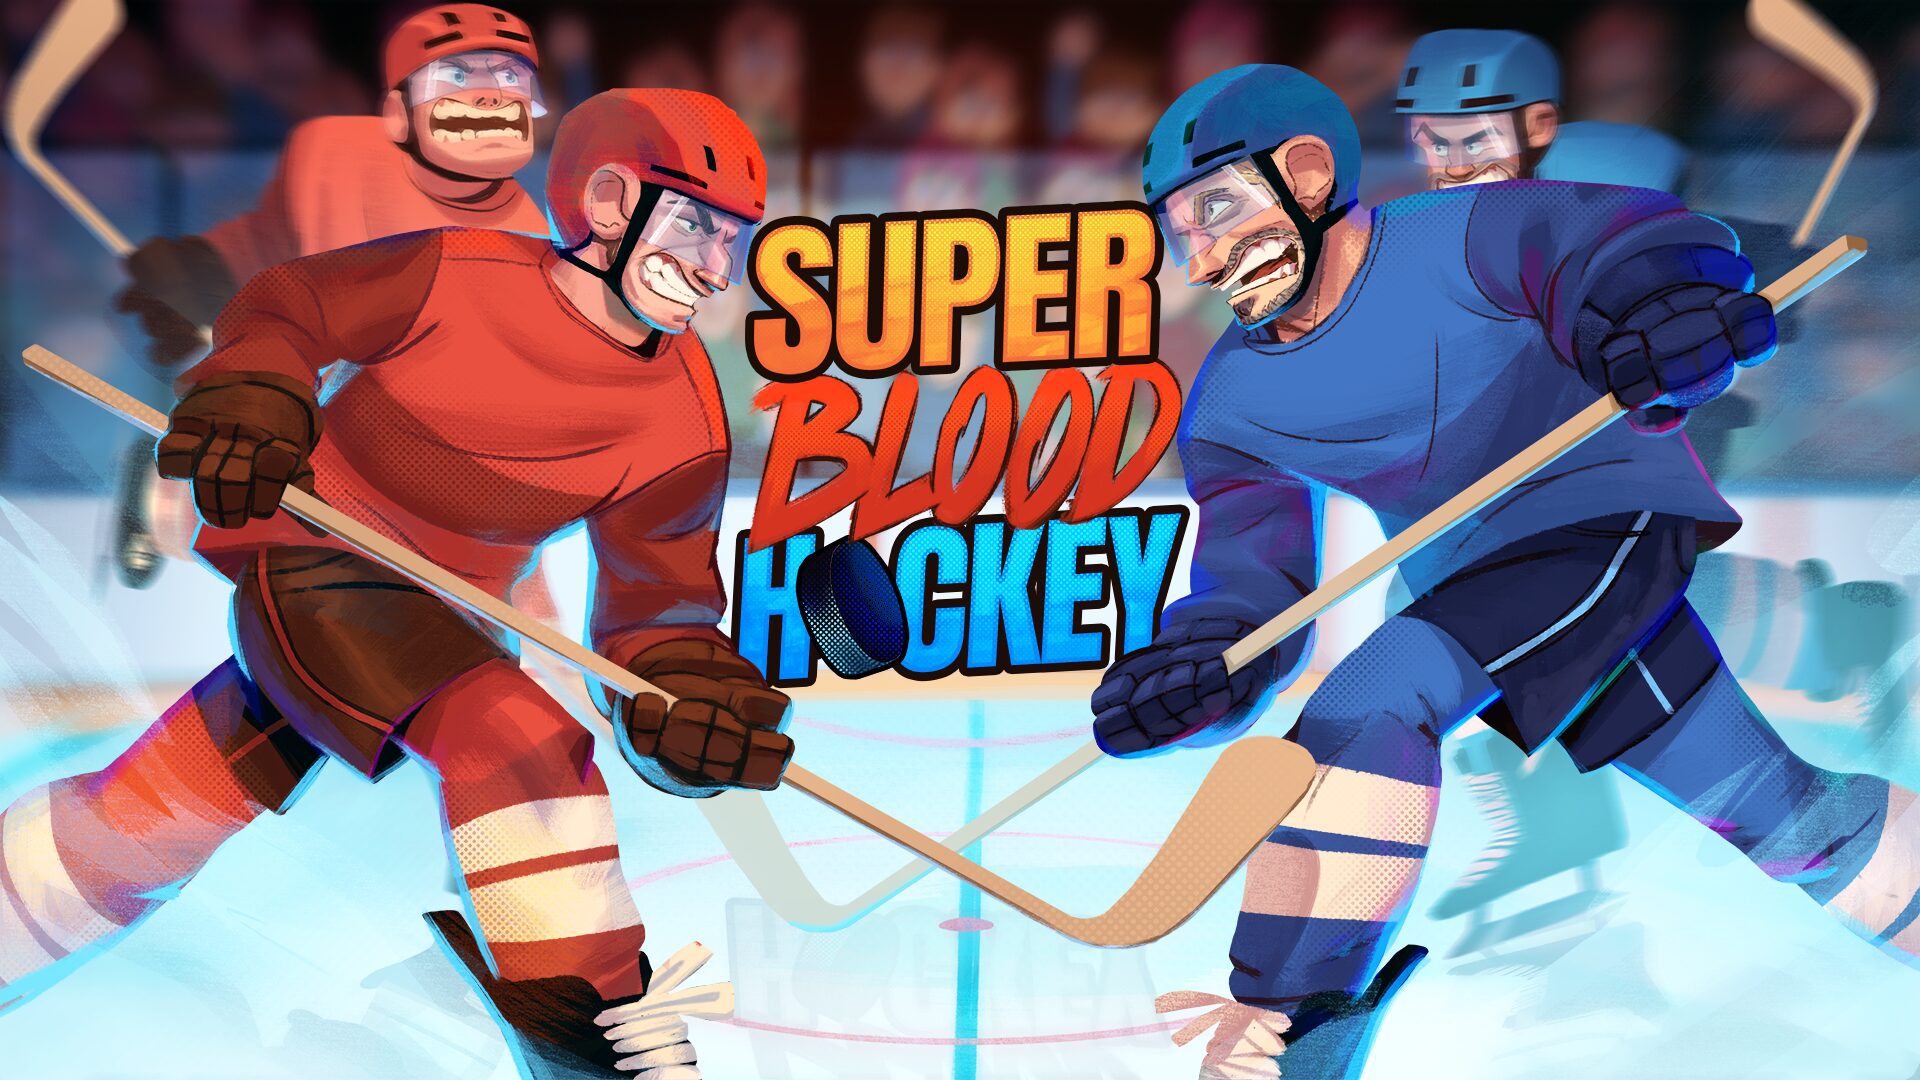 Super Blood Hockey brings arcade sports and 8-bit brutality to consoles